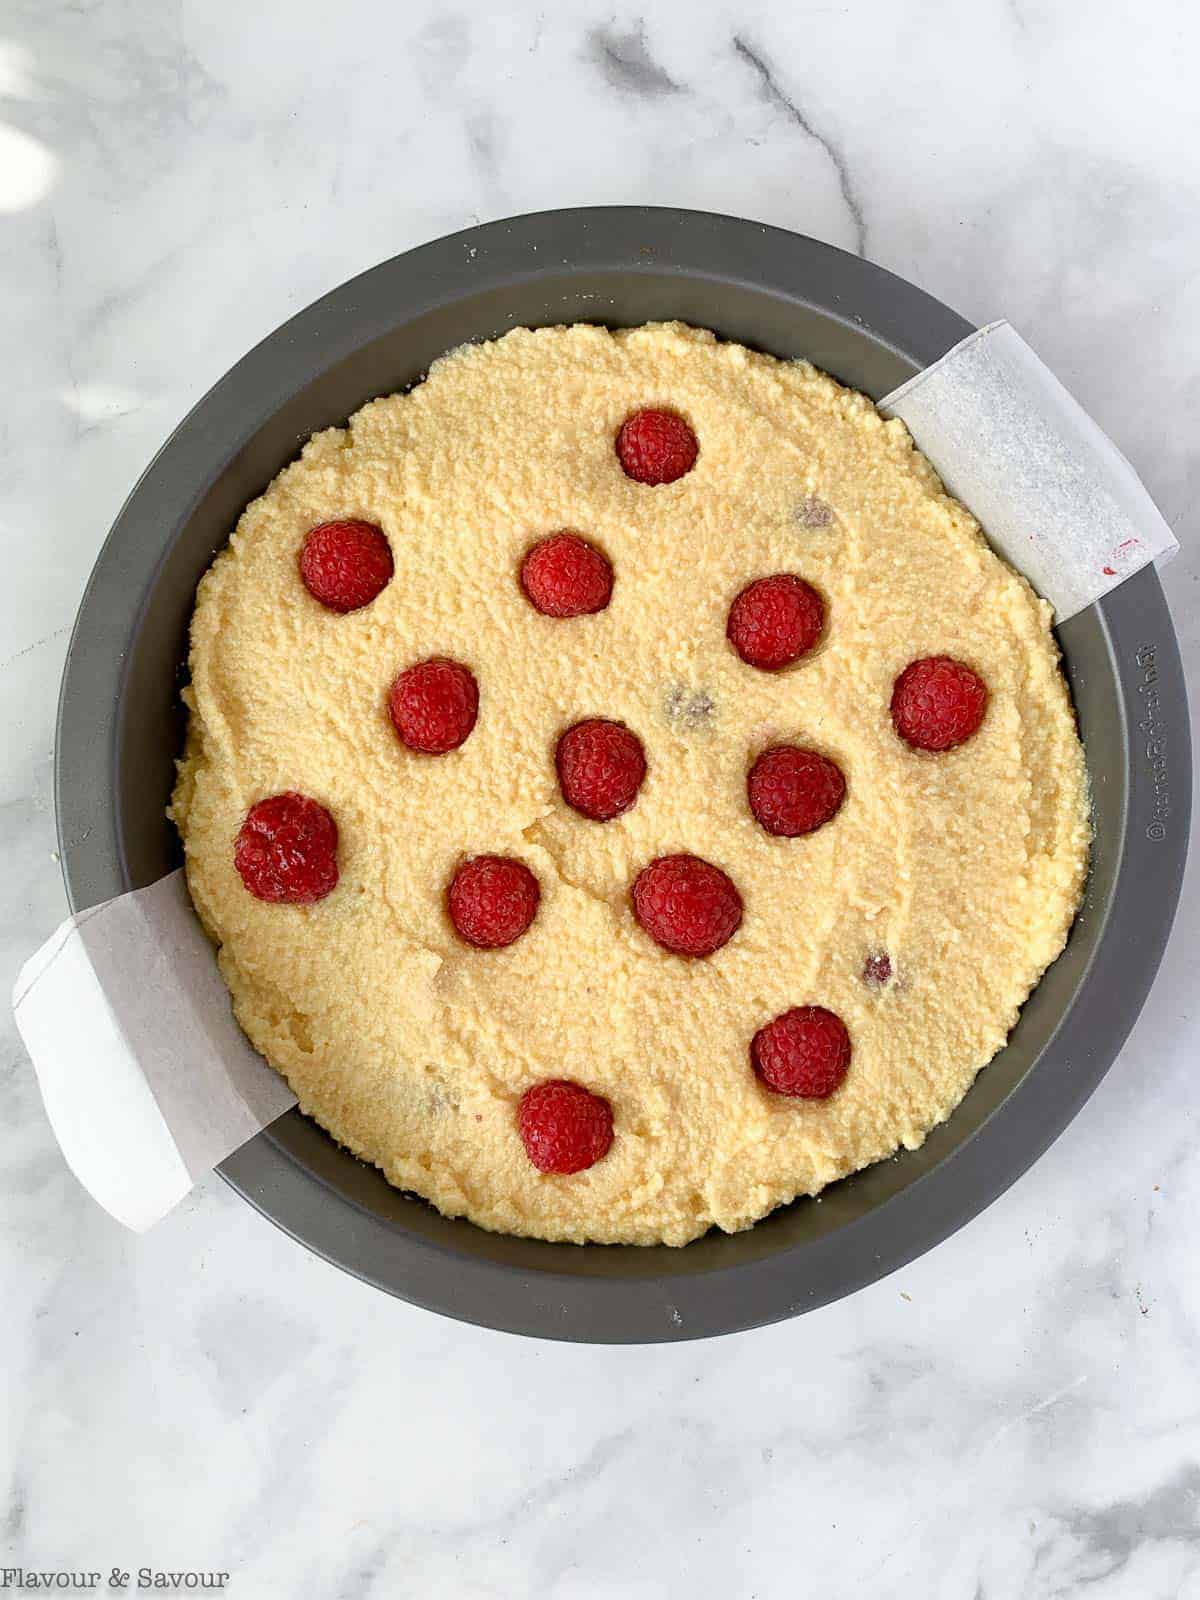 Add a final layer of raspberries to the top of the cake before baking